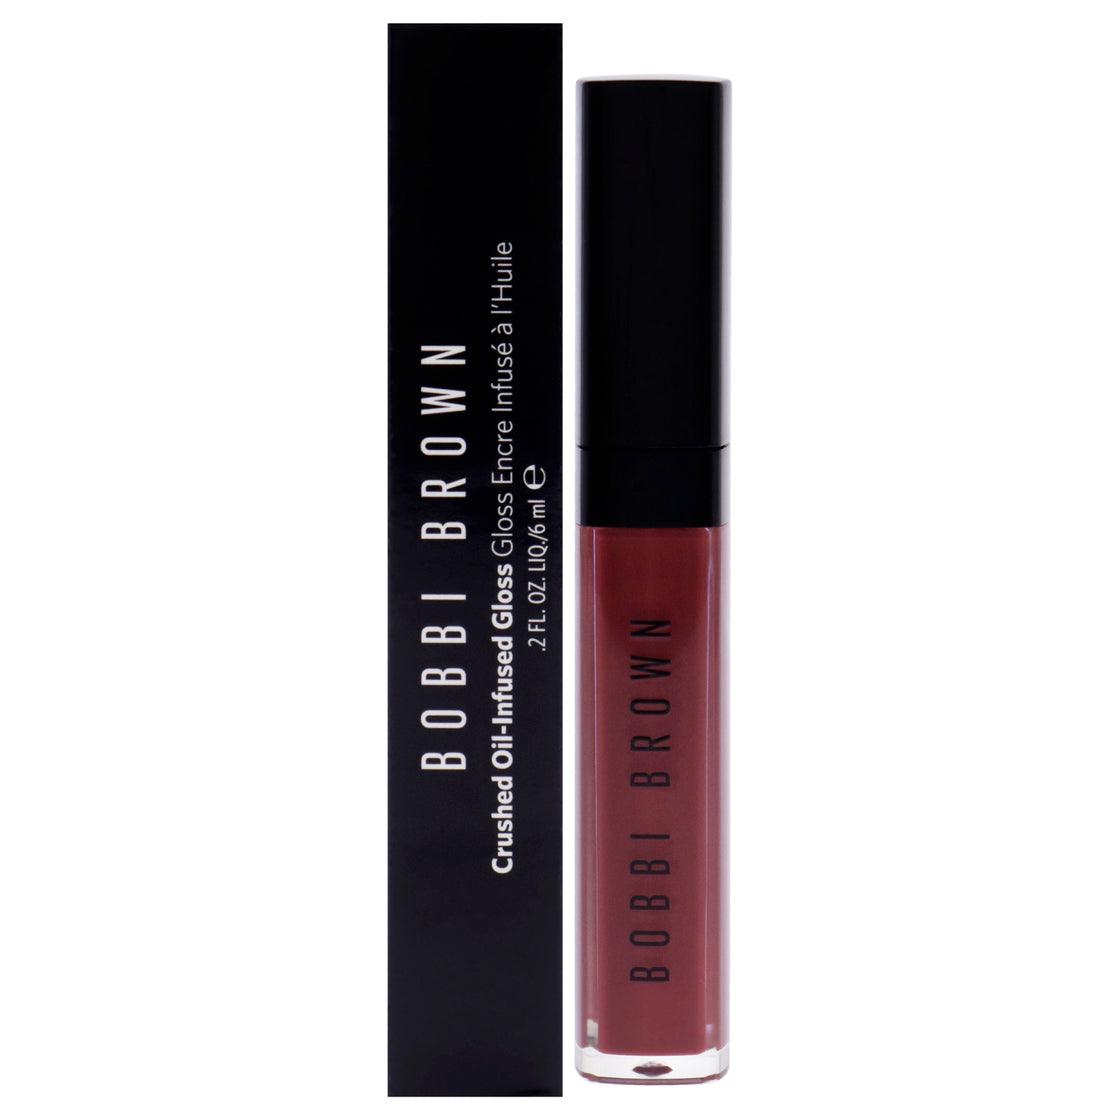 Crushed Oil-Infused Gloss - Slow Jam by Bobbi Brown for Women - 0.2 oz Lip Gloss